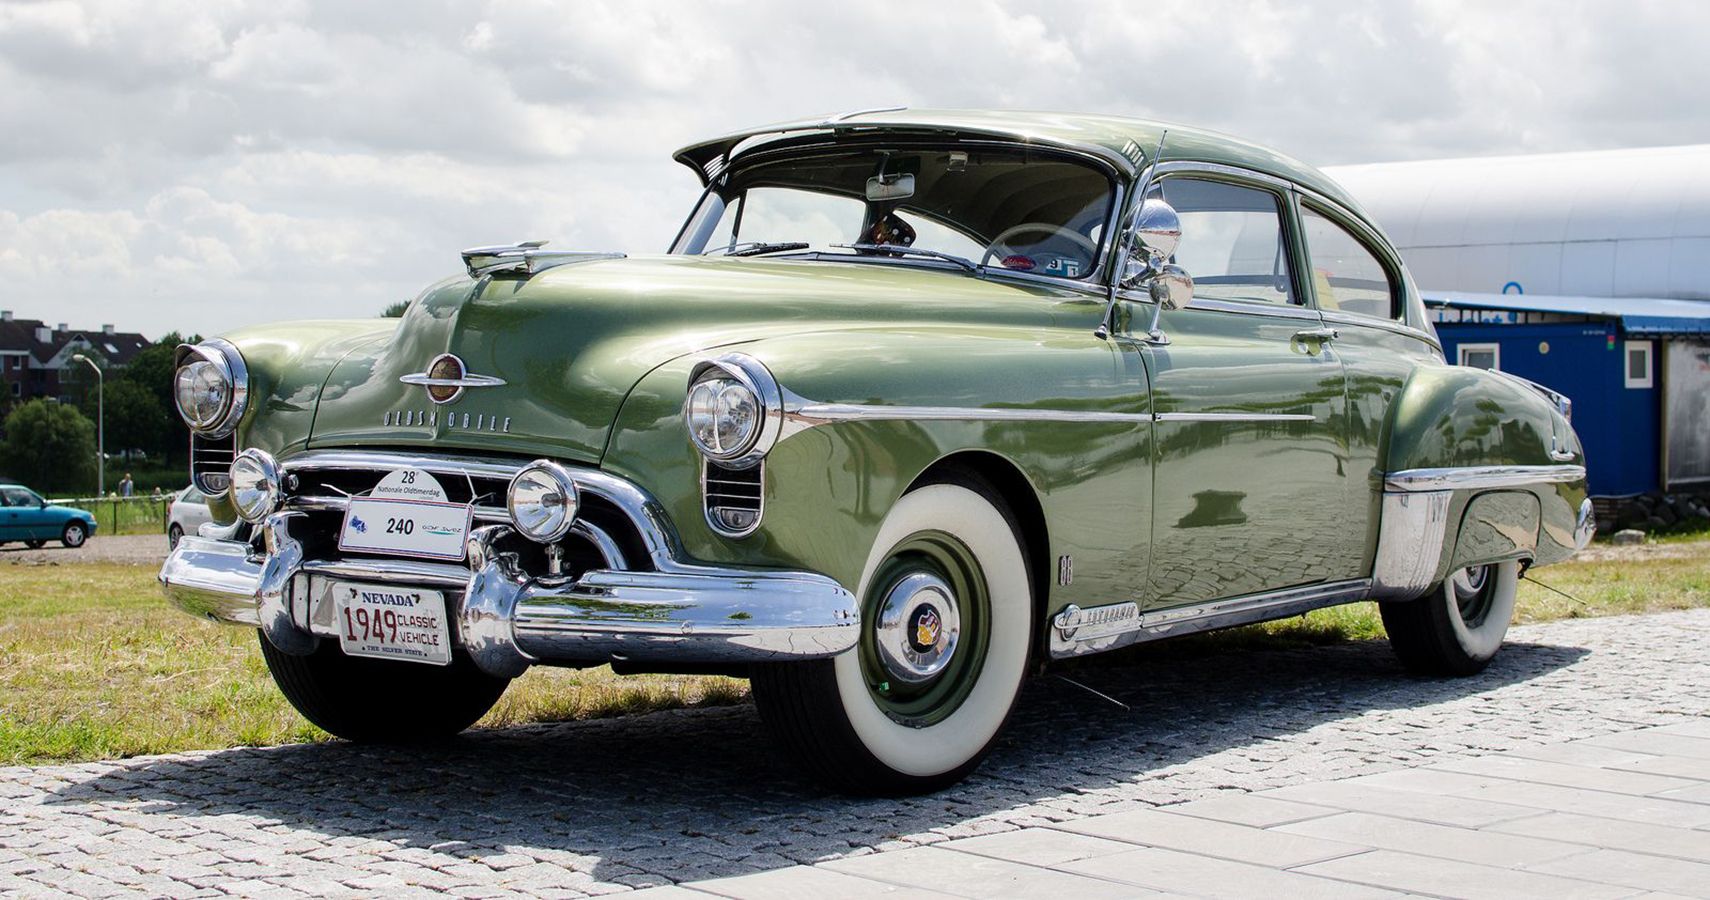 The Good Olds: 1949 Oldsmobile Rocket 88, First Muscle Car